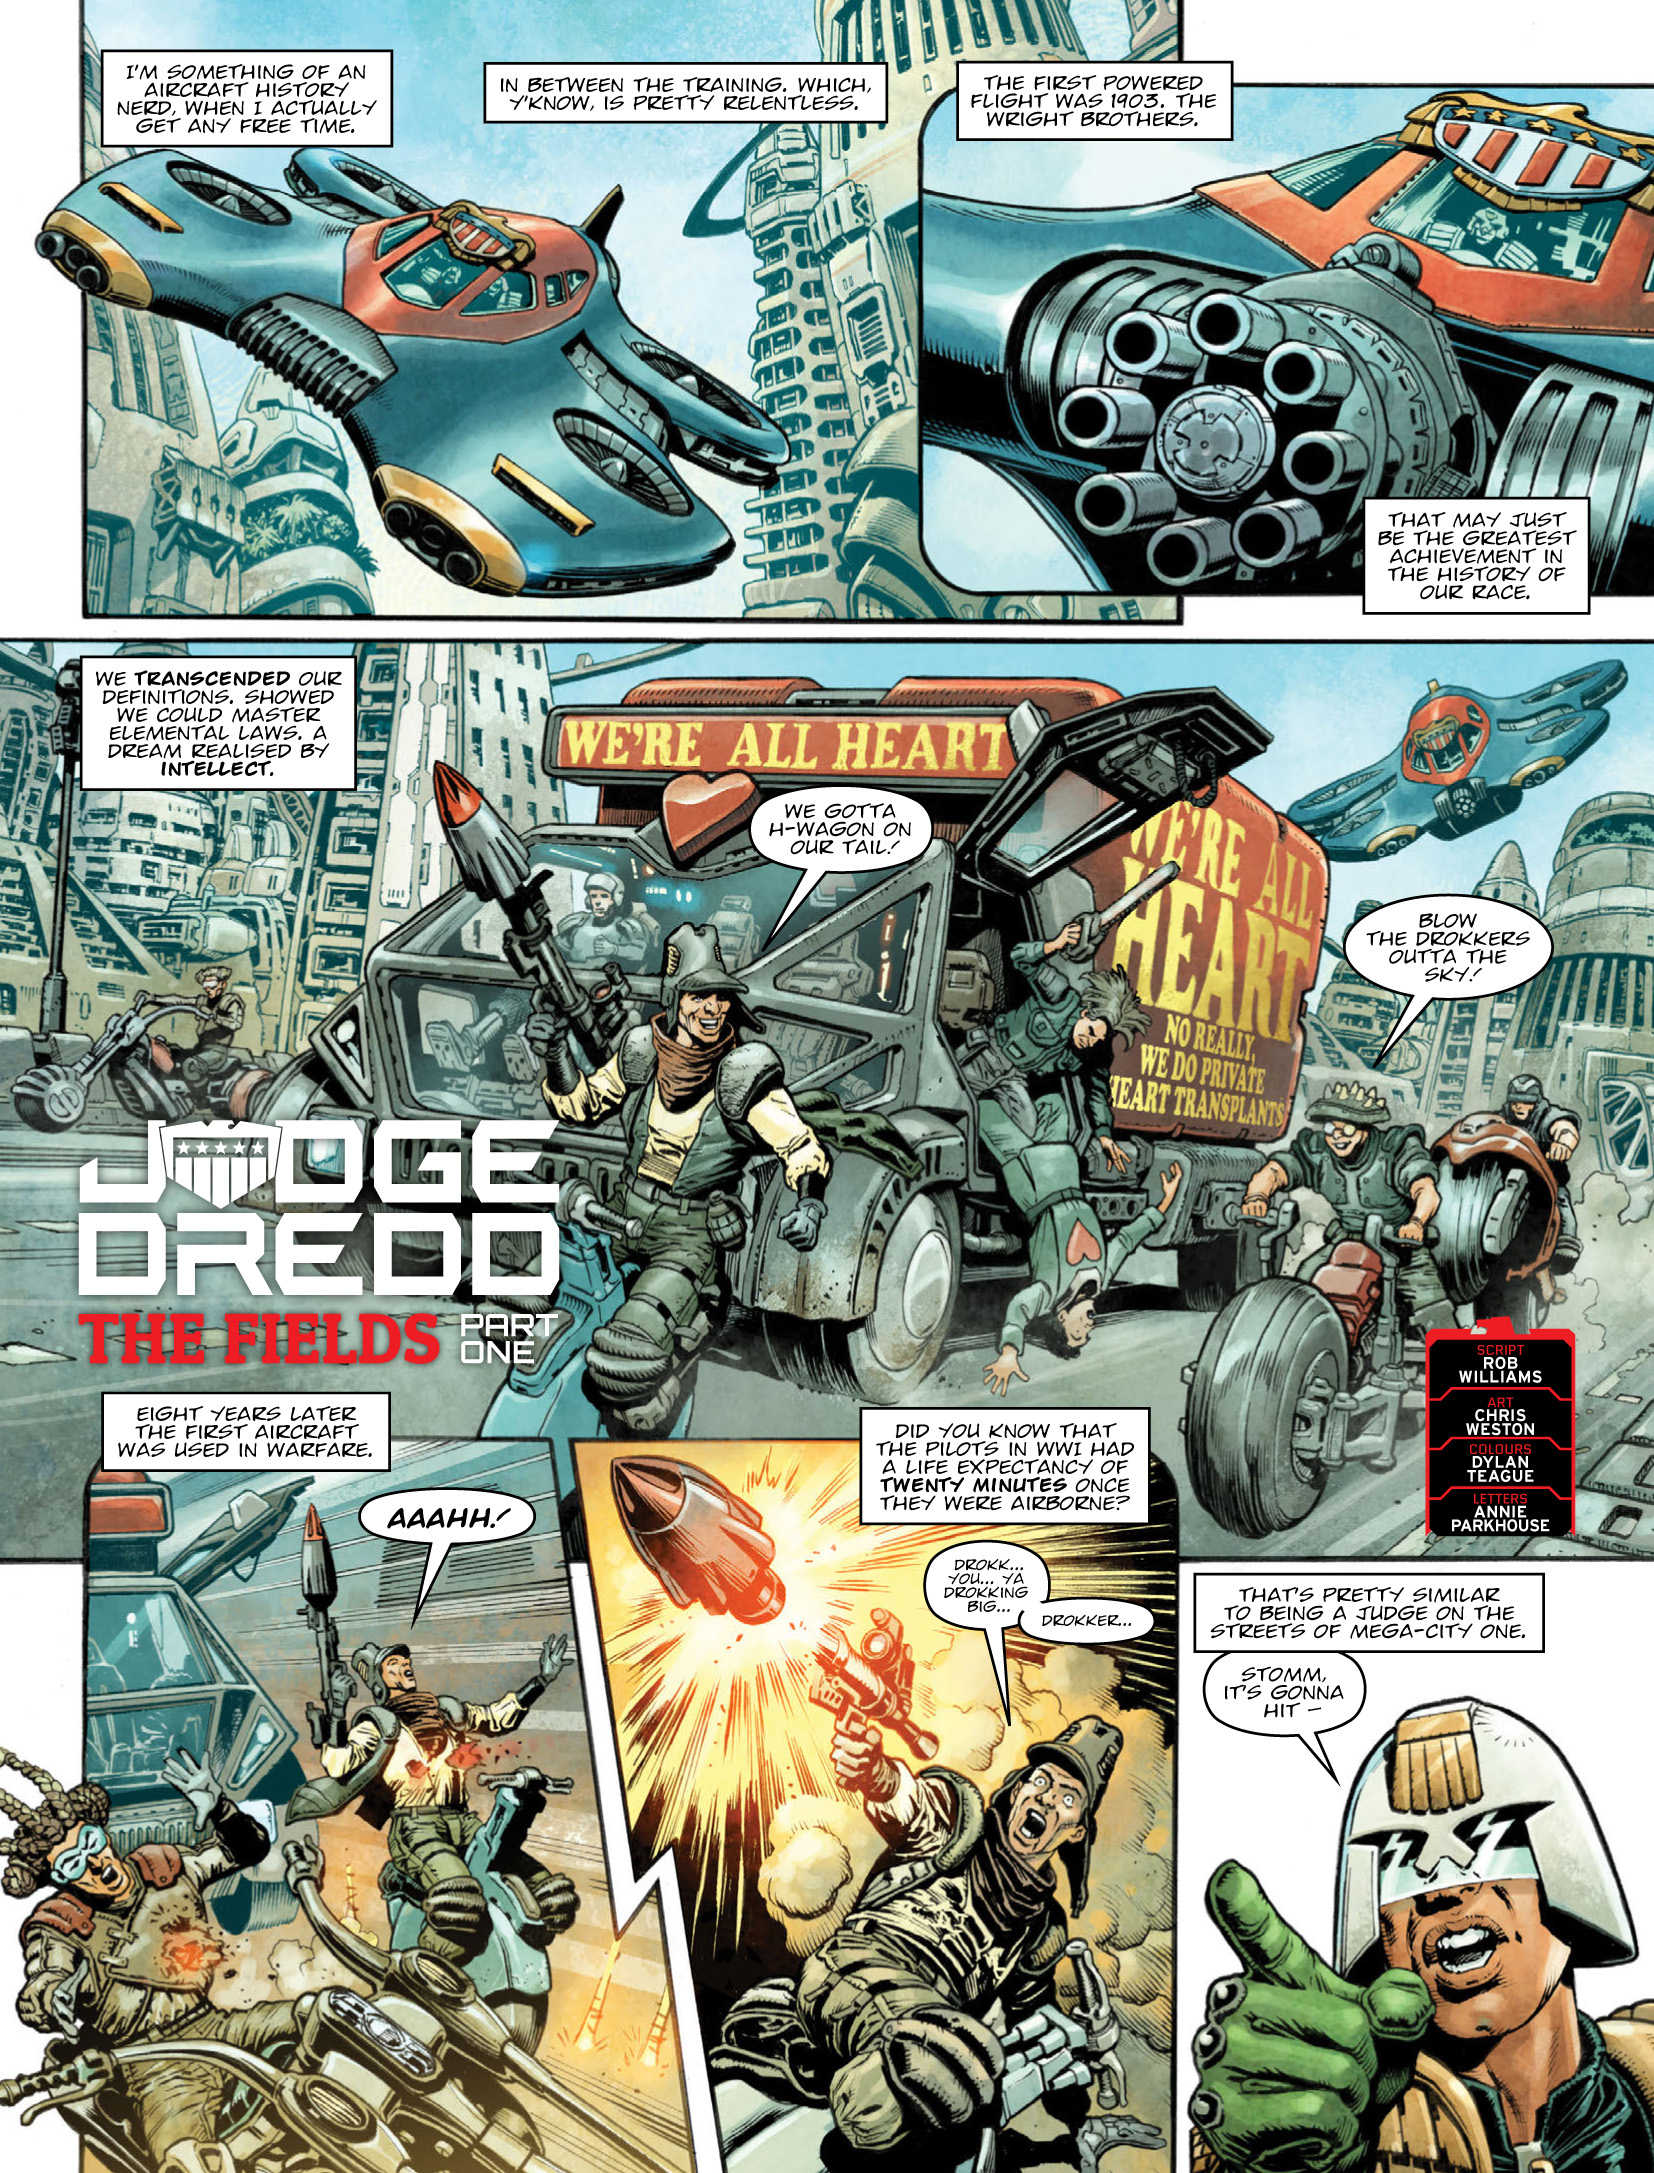 2000 AD: Chapter 2035 - Page 3